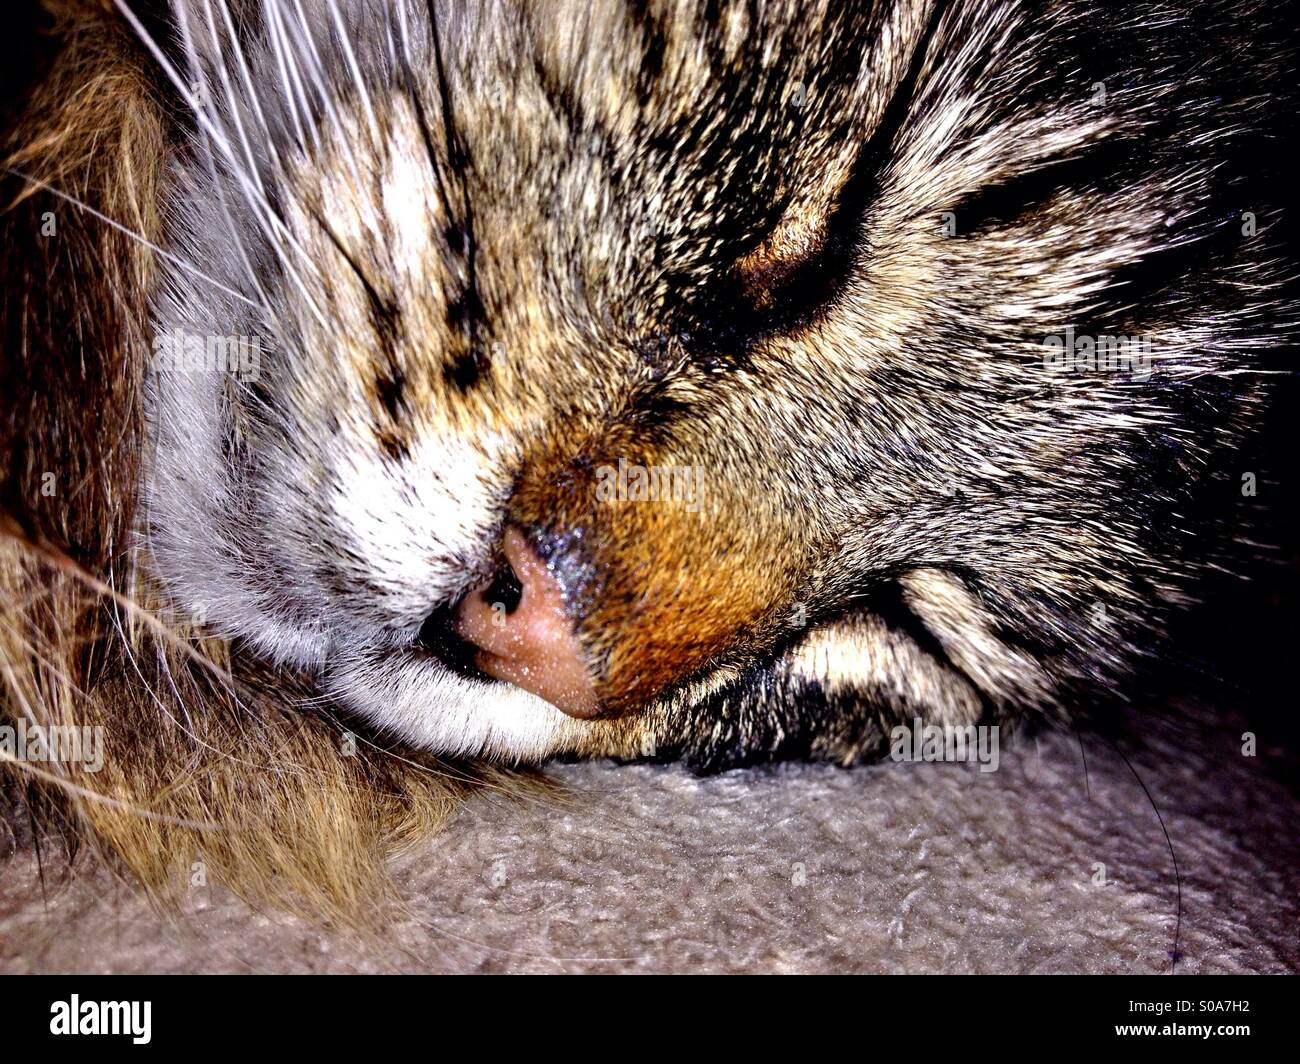 Les tabby cat sleeping Banque D'Images